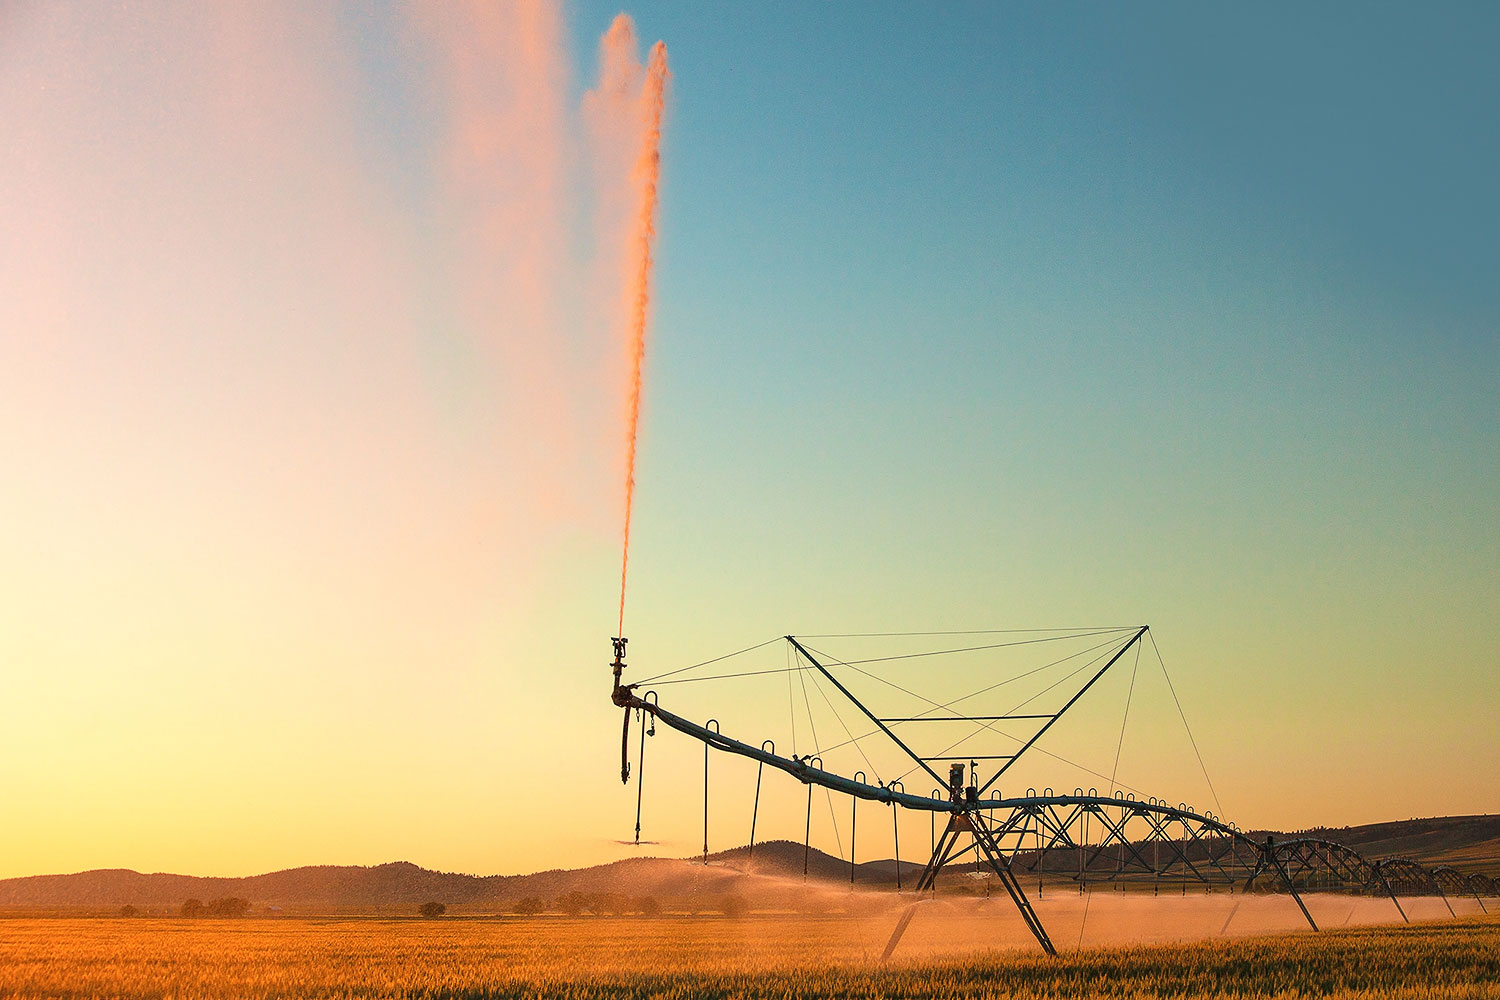 A center pivot irrigation apparatus spraying water on a field of wheat is painted a beautiful hue in the late afternoon light outside of White Sulphur Springs, Montana. → Buy a Print